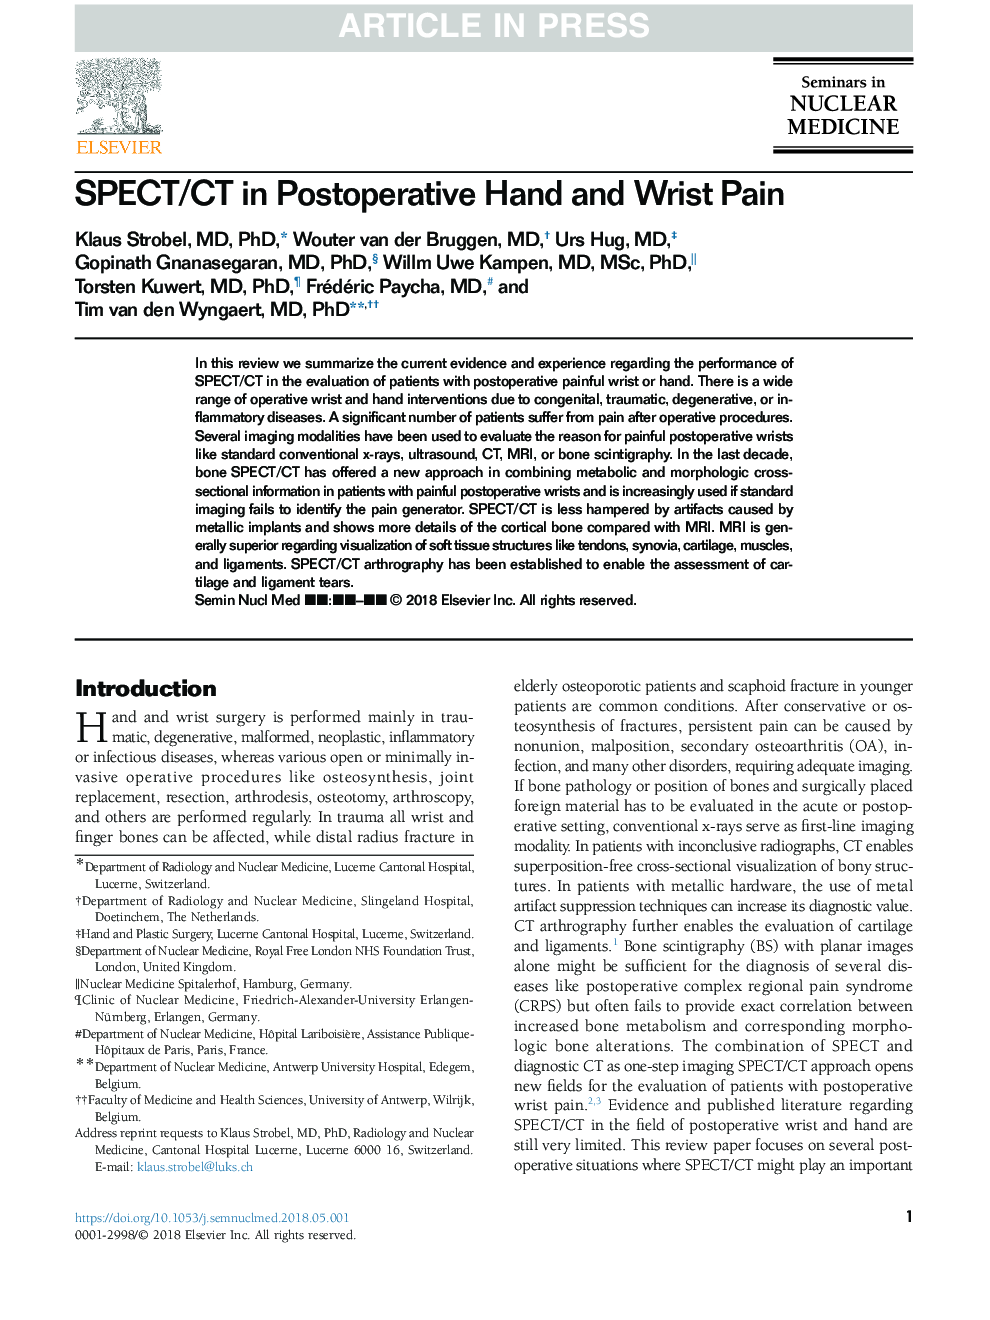 SPECT/CT in Postoperative Hand and Wrist Pain